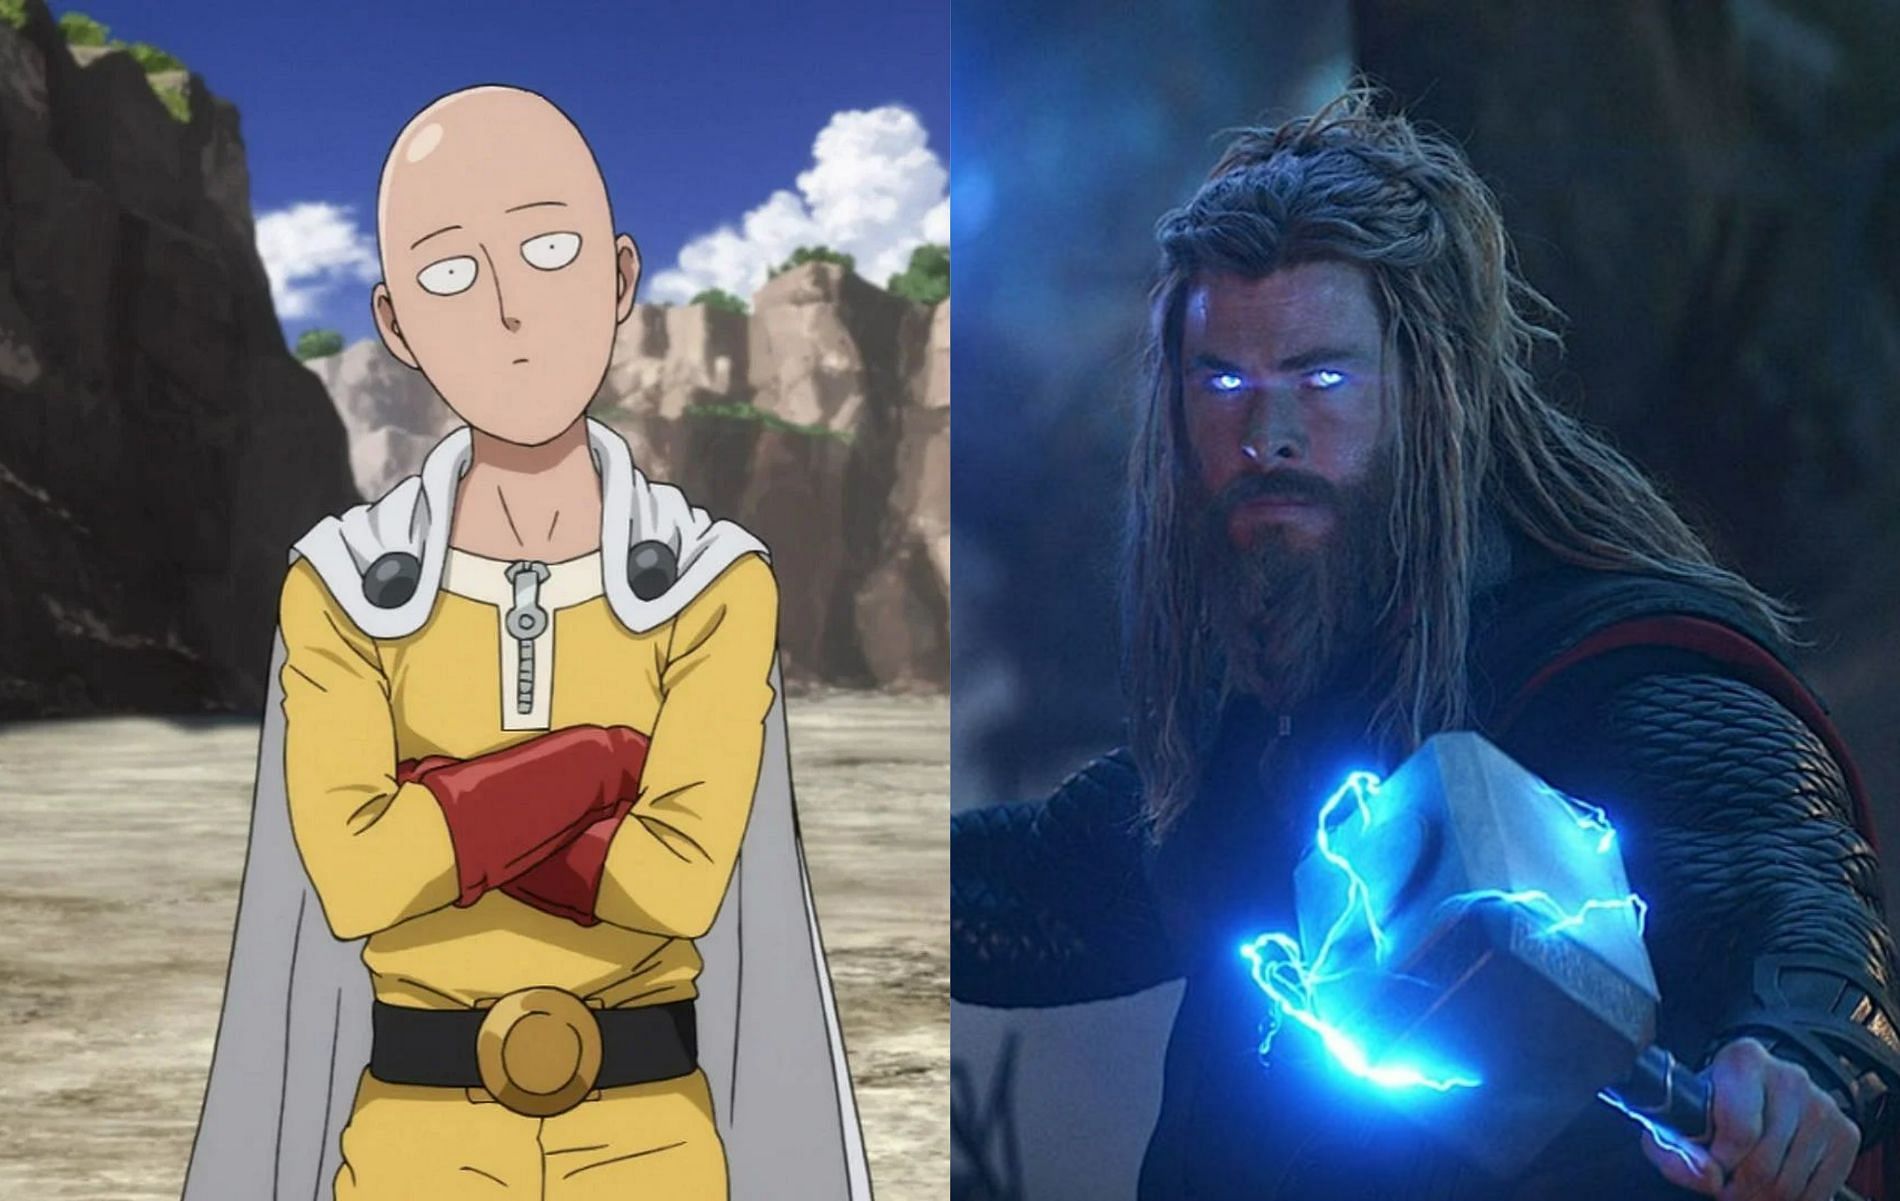 Is One Punch Man&#039;s Saitama worthy of wielding Mjolnir? (Images via One Punch Man and Marvel Cinematic Universe)